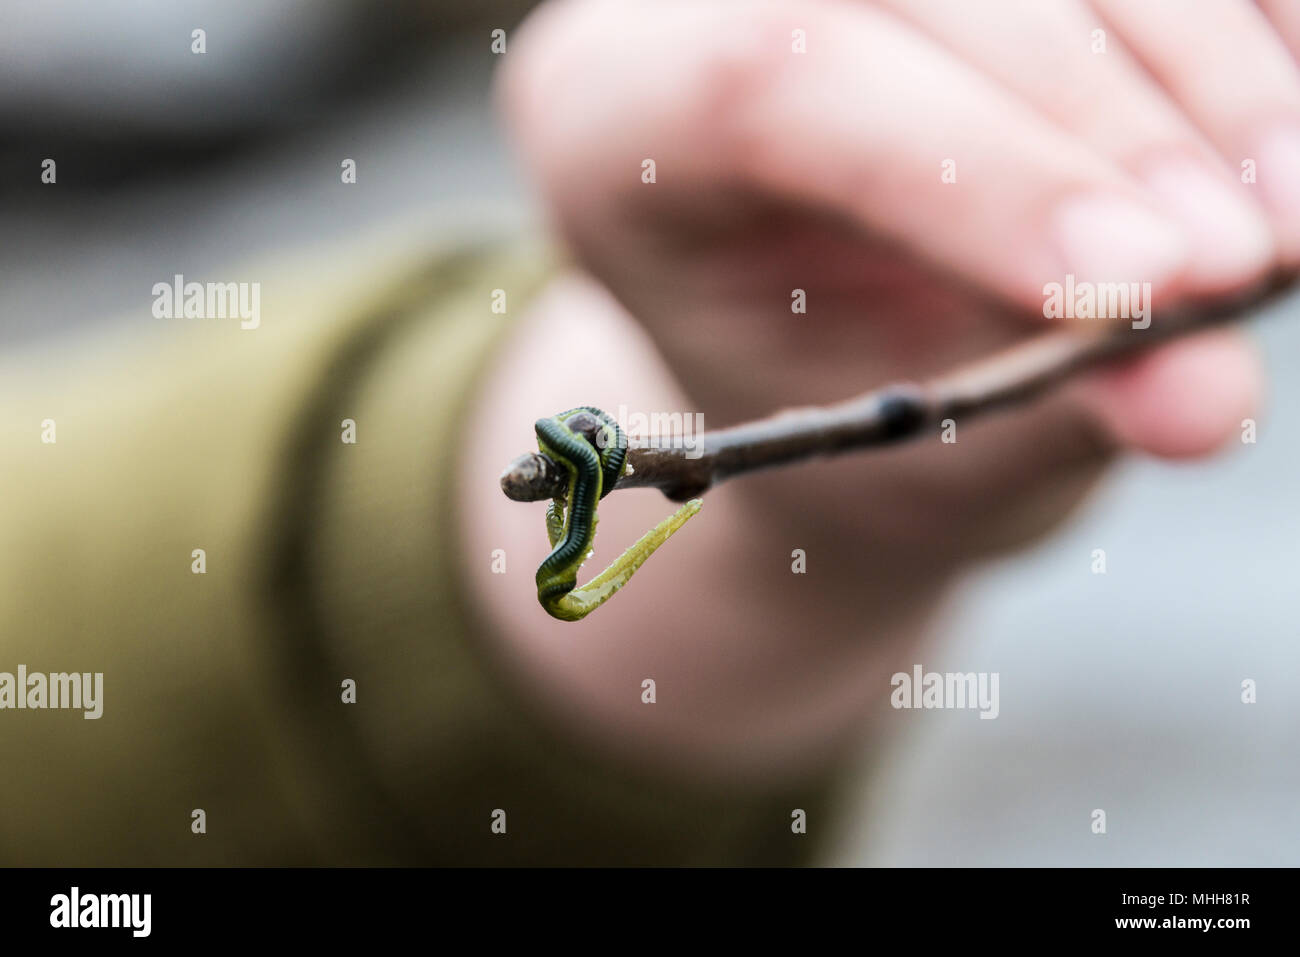 A green-leaf worm (Eulalia viridis) on the end of a stick held in a hand Stock Photo